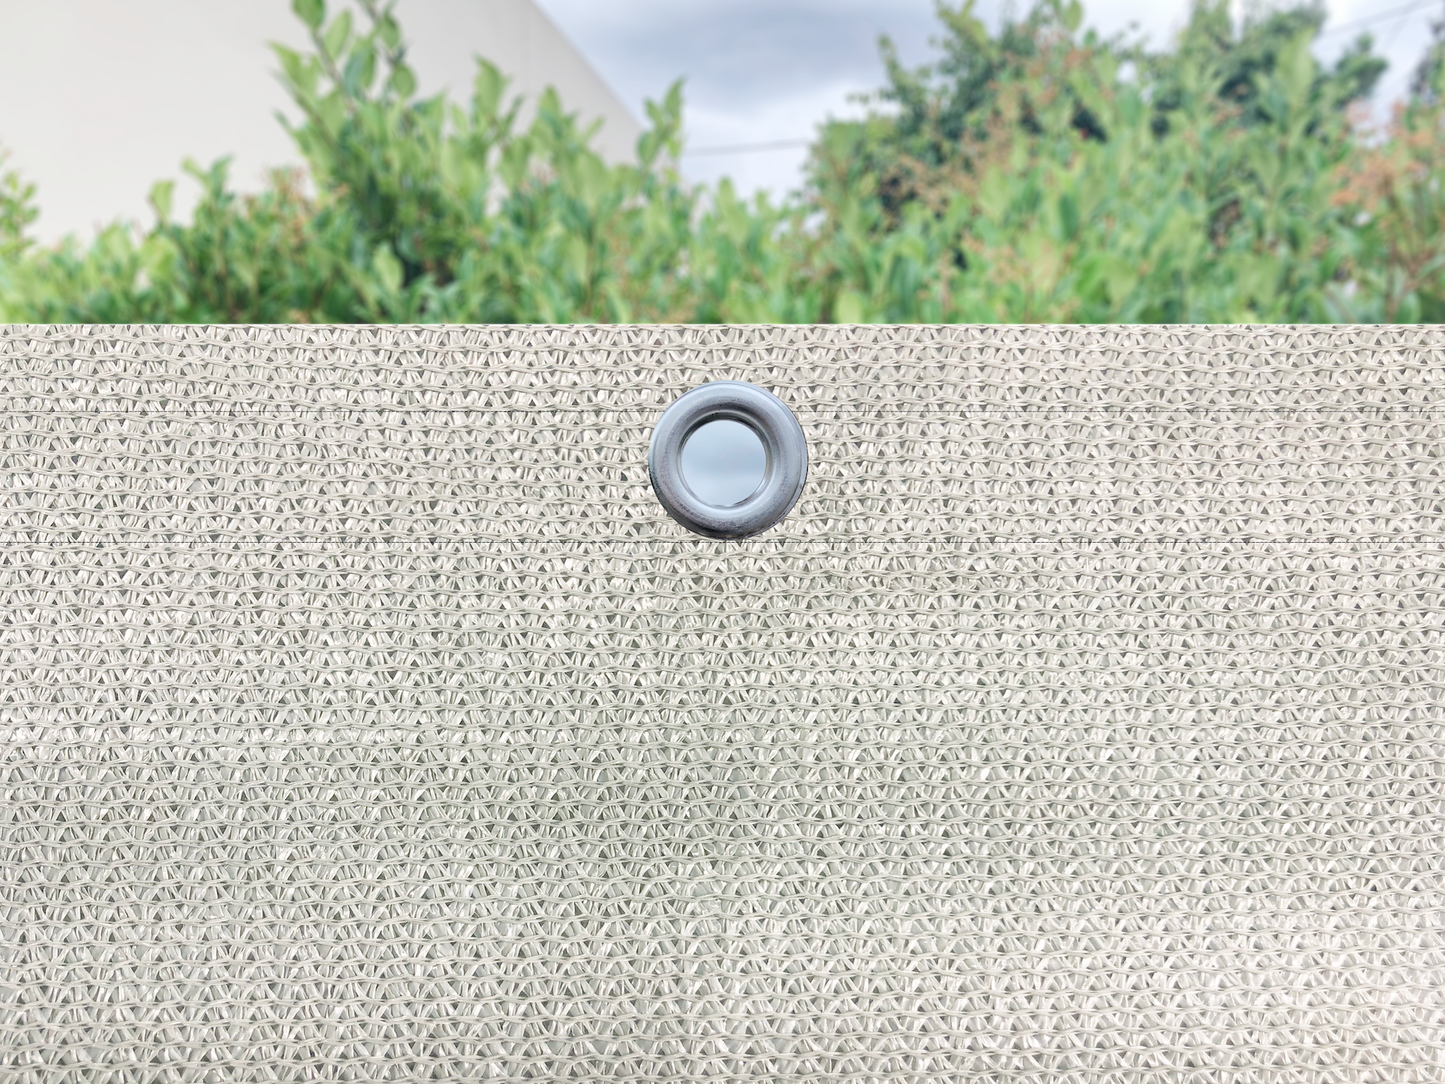 HDPE Sun Shade Cover Panel with 1-Side Grommets & 1-Side Rod Pocket – Smoke Tan